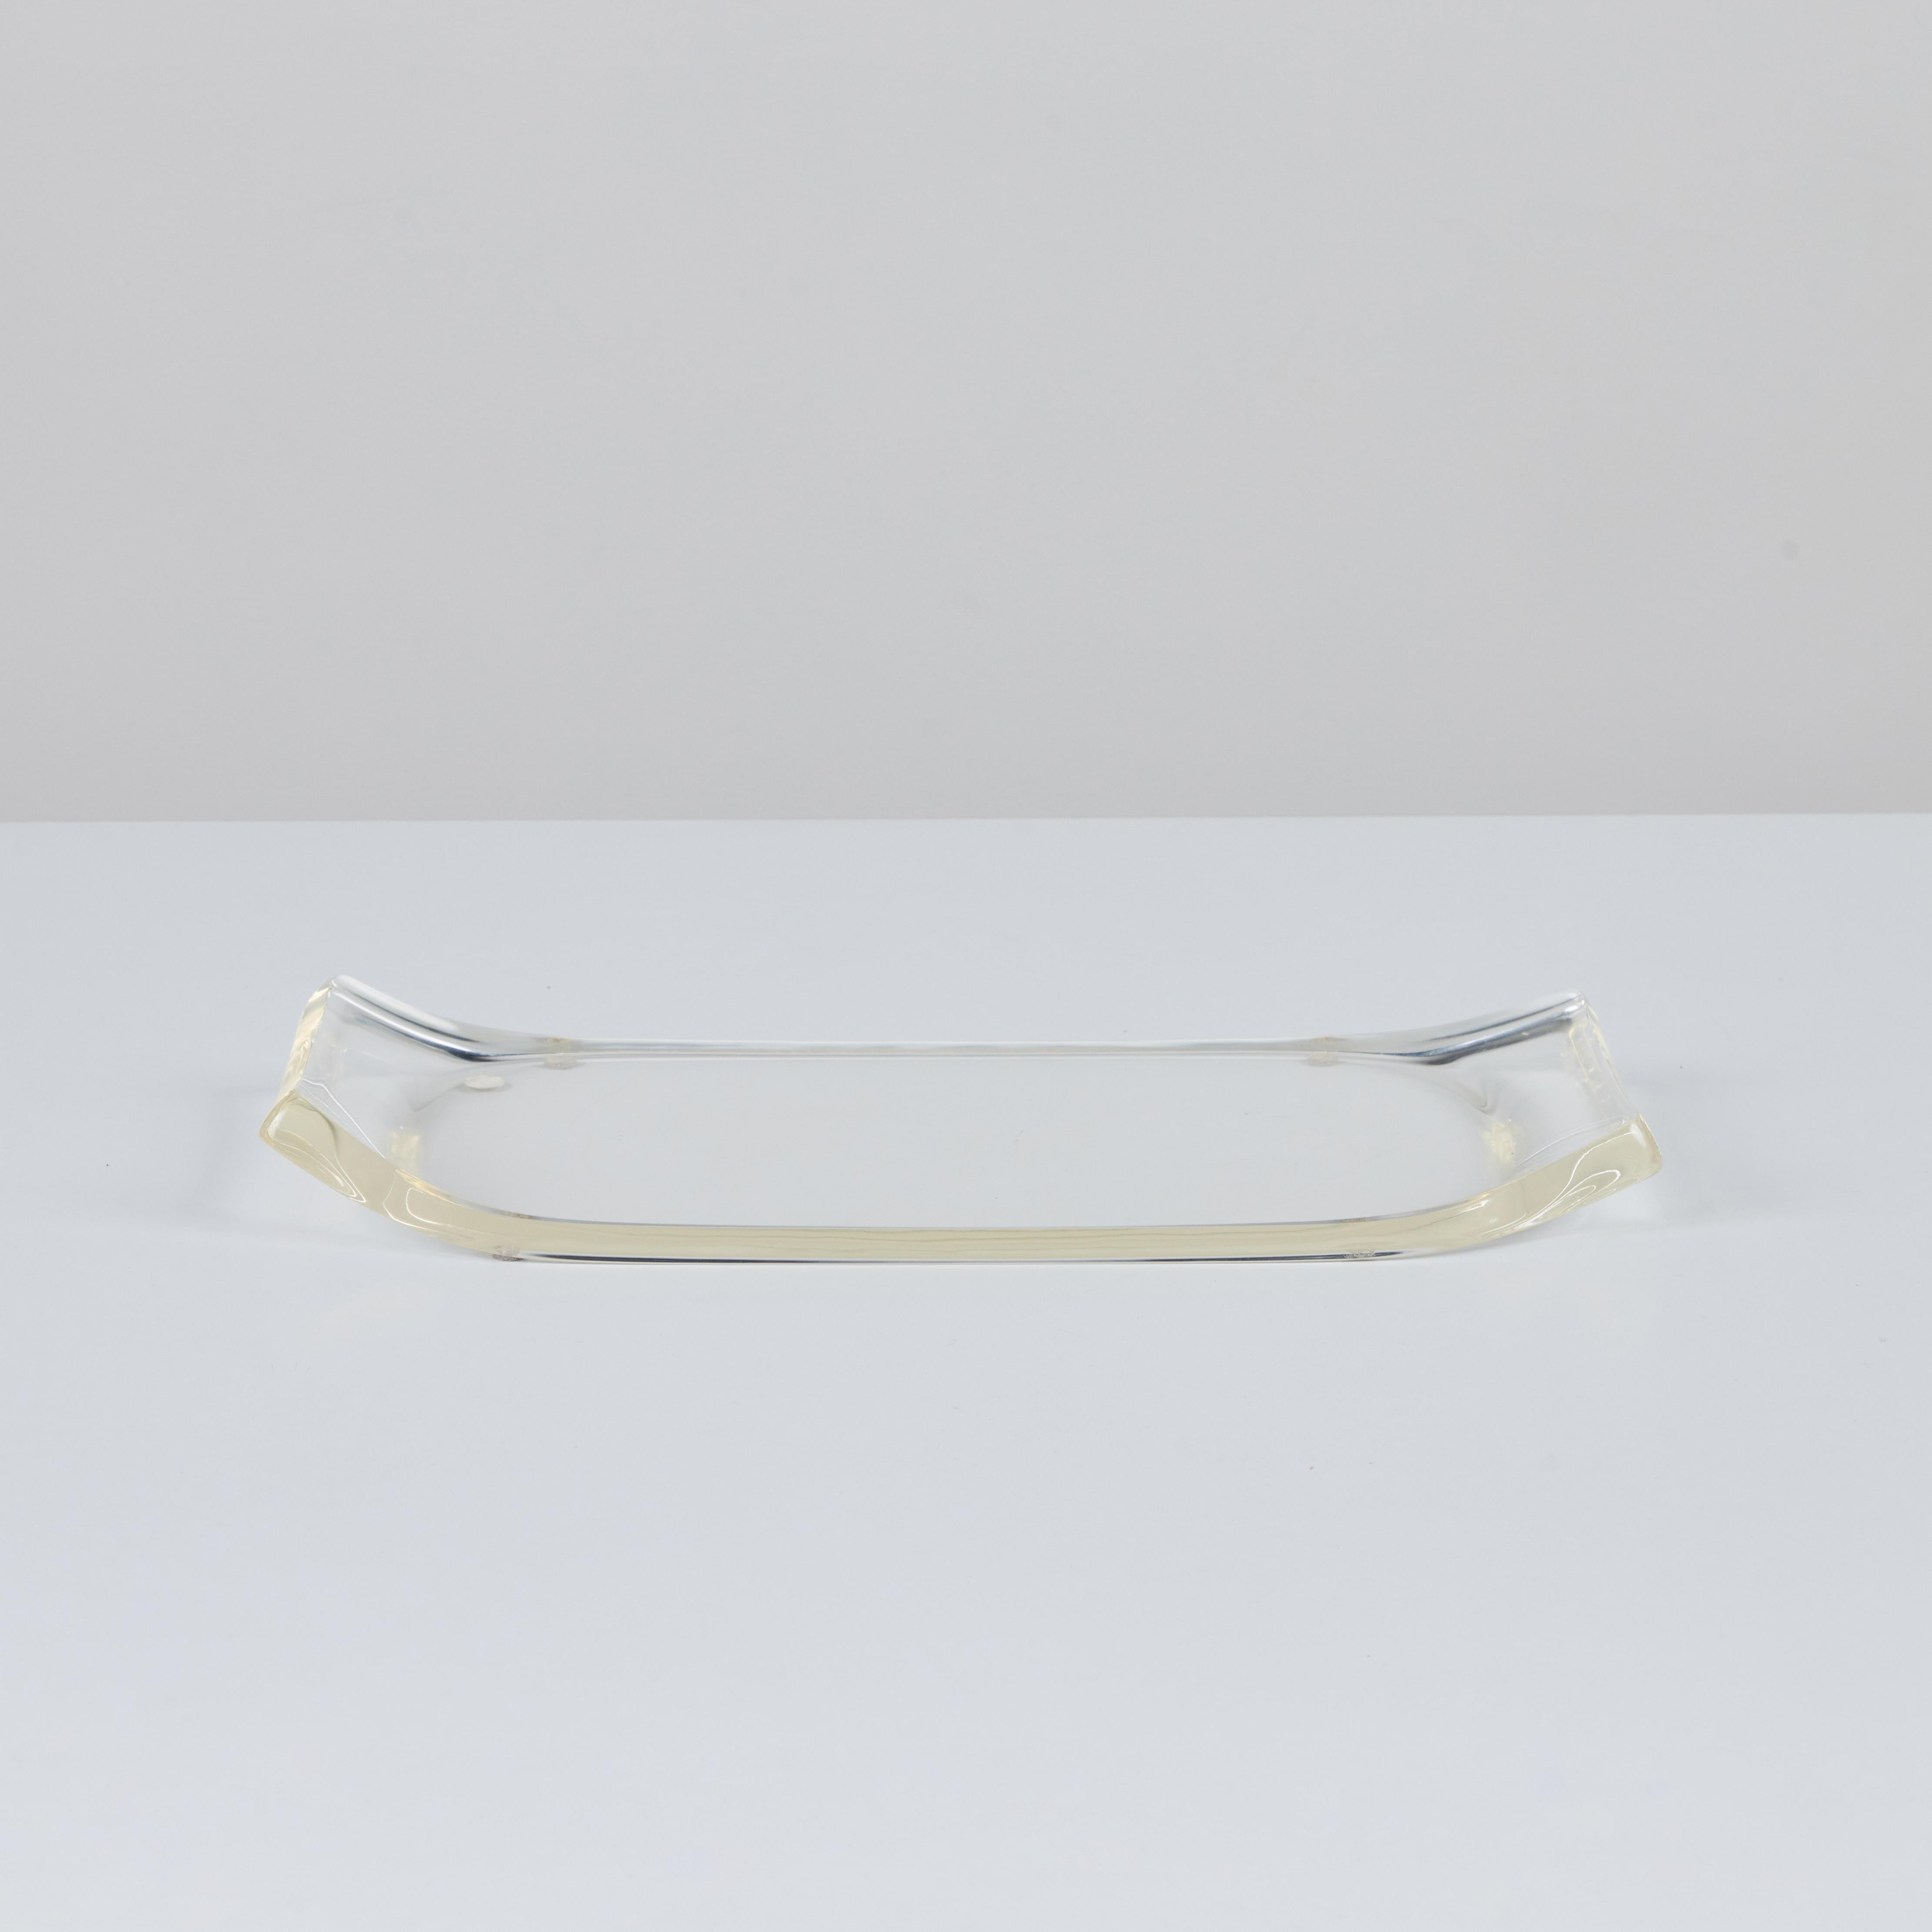 Rectangular Lucite Tray by Ritts Co. In Good Condition For Sale In Los Angeles, CA